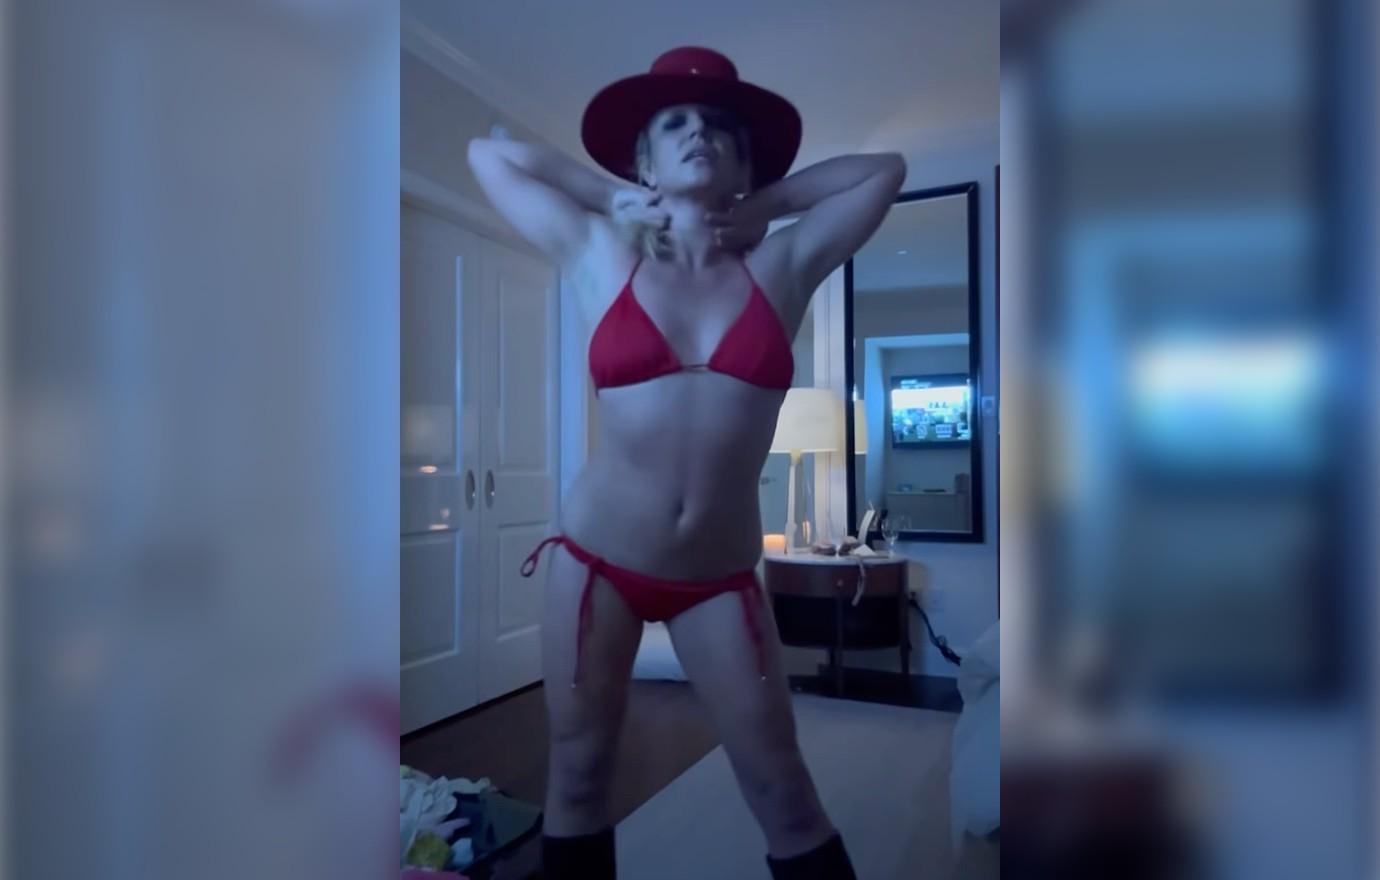 Britney Spears Shows Off Weird Dance Moves In Bizarre Video Watch pic